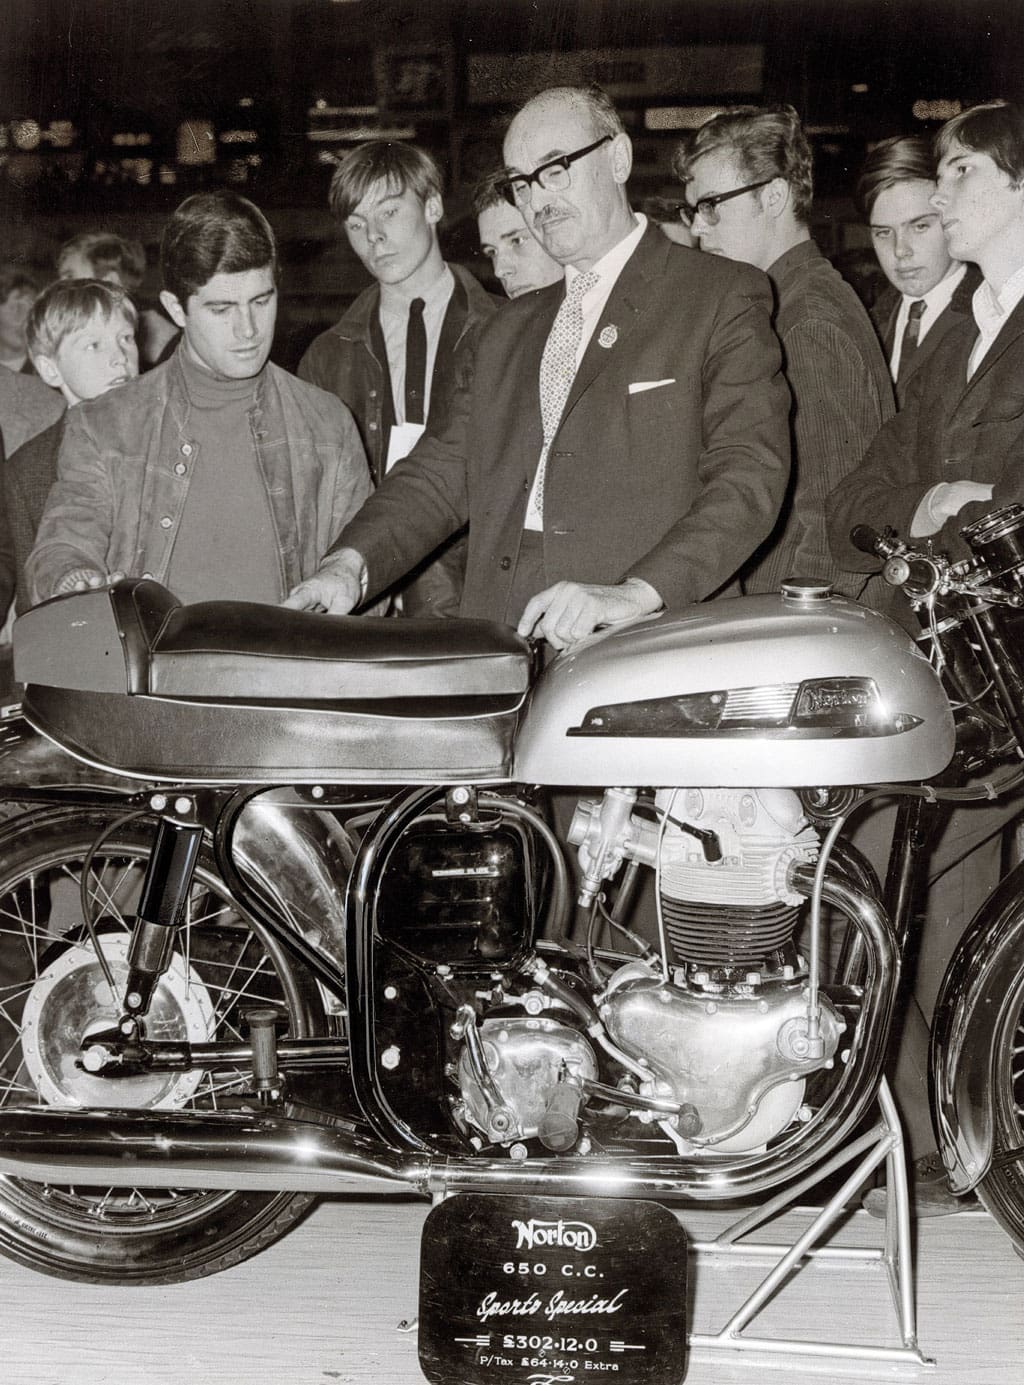 Giacomo Agostini chooses a seat for his 350SS, at the 1966 motorcycle show.